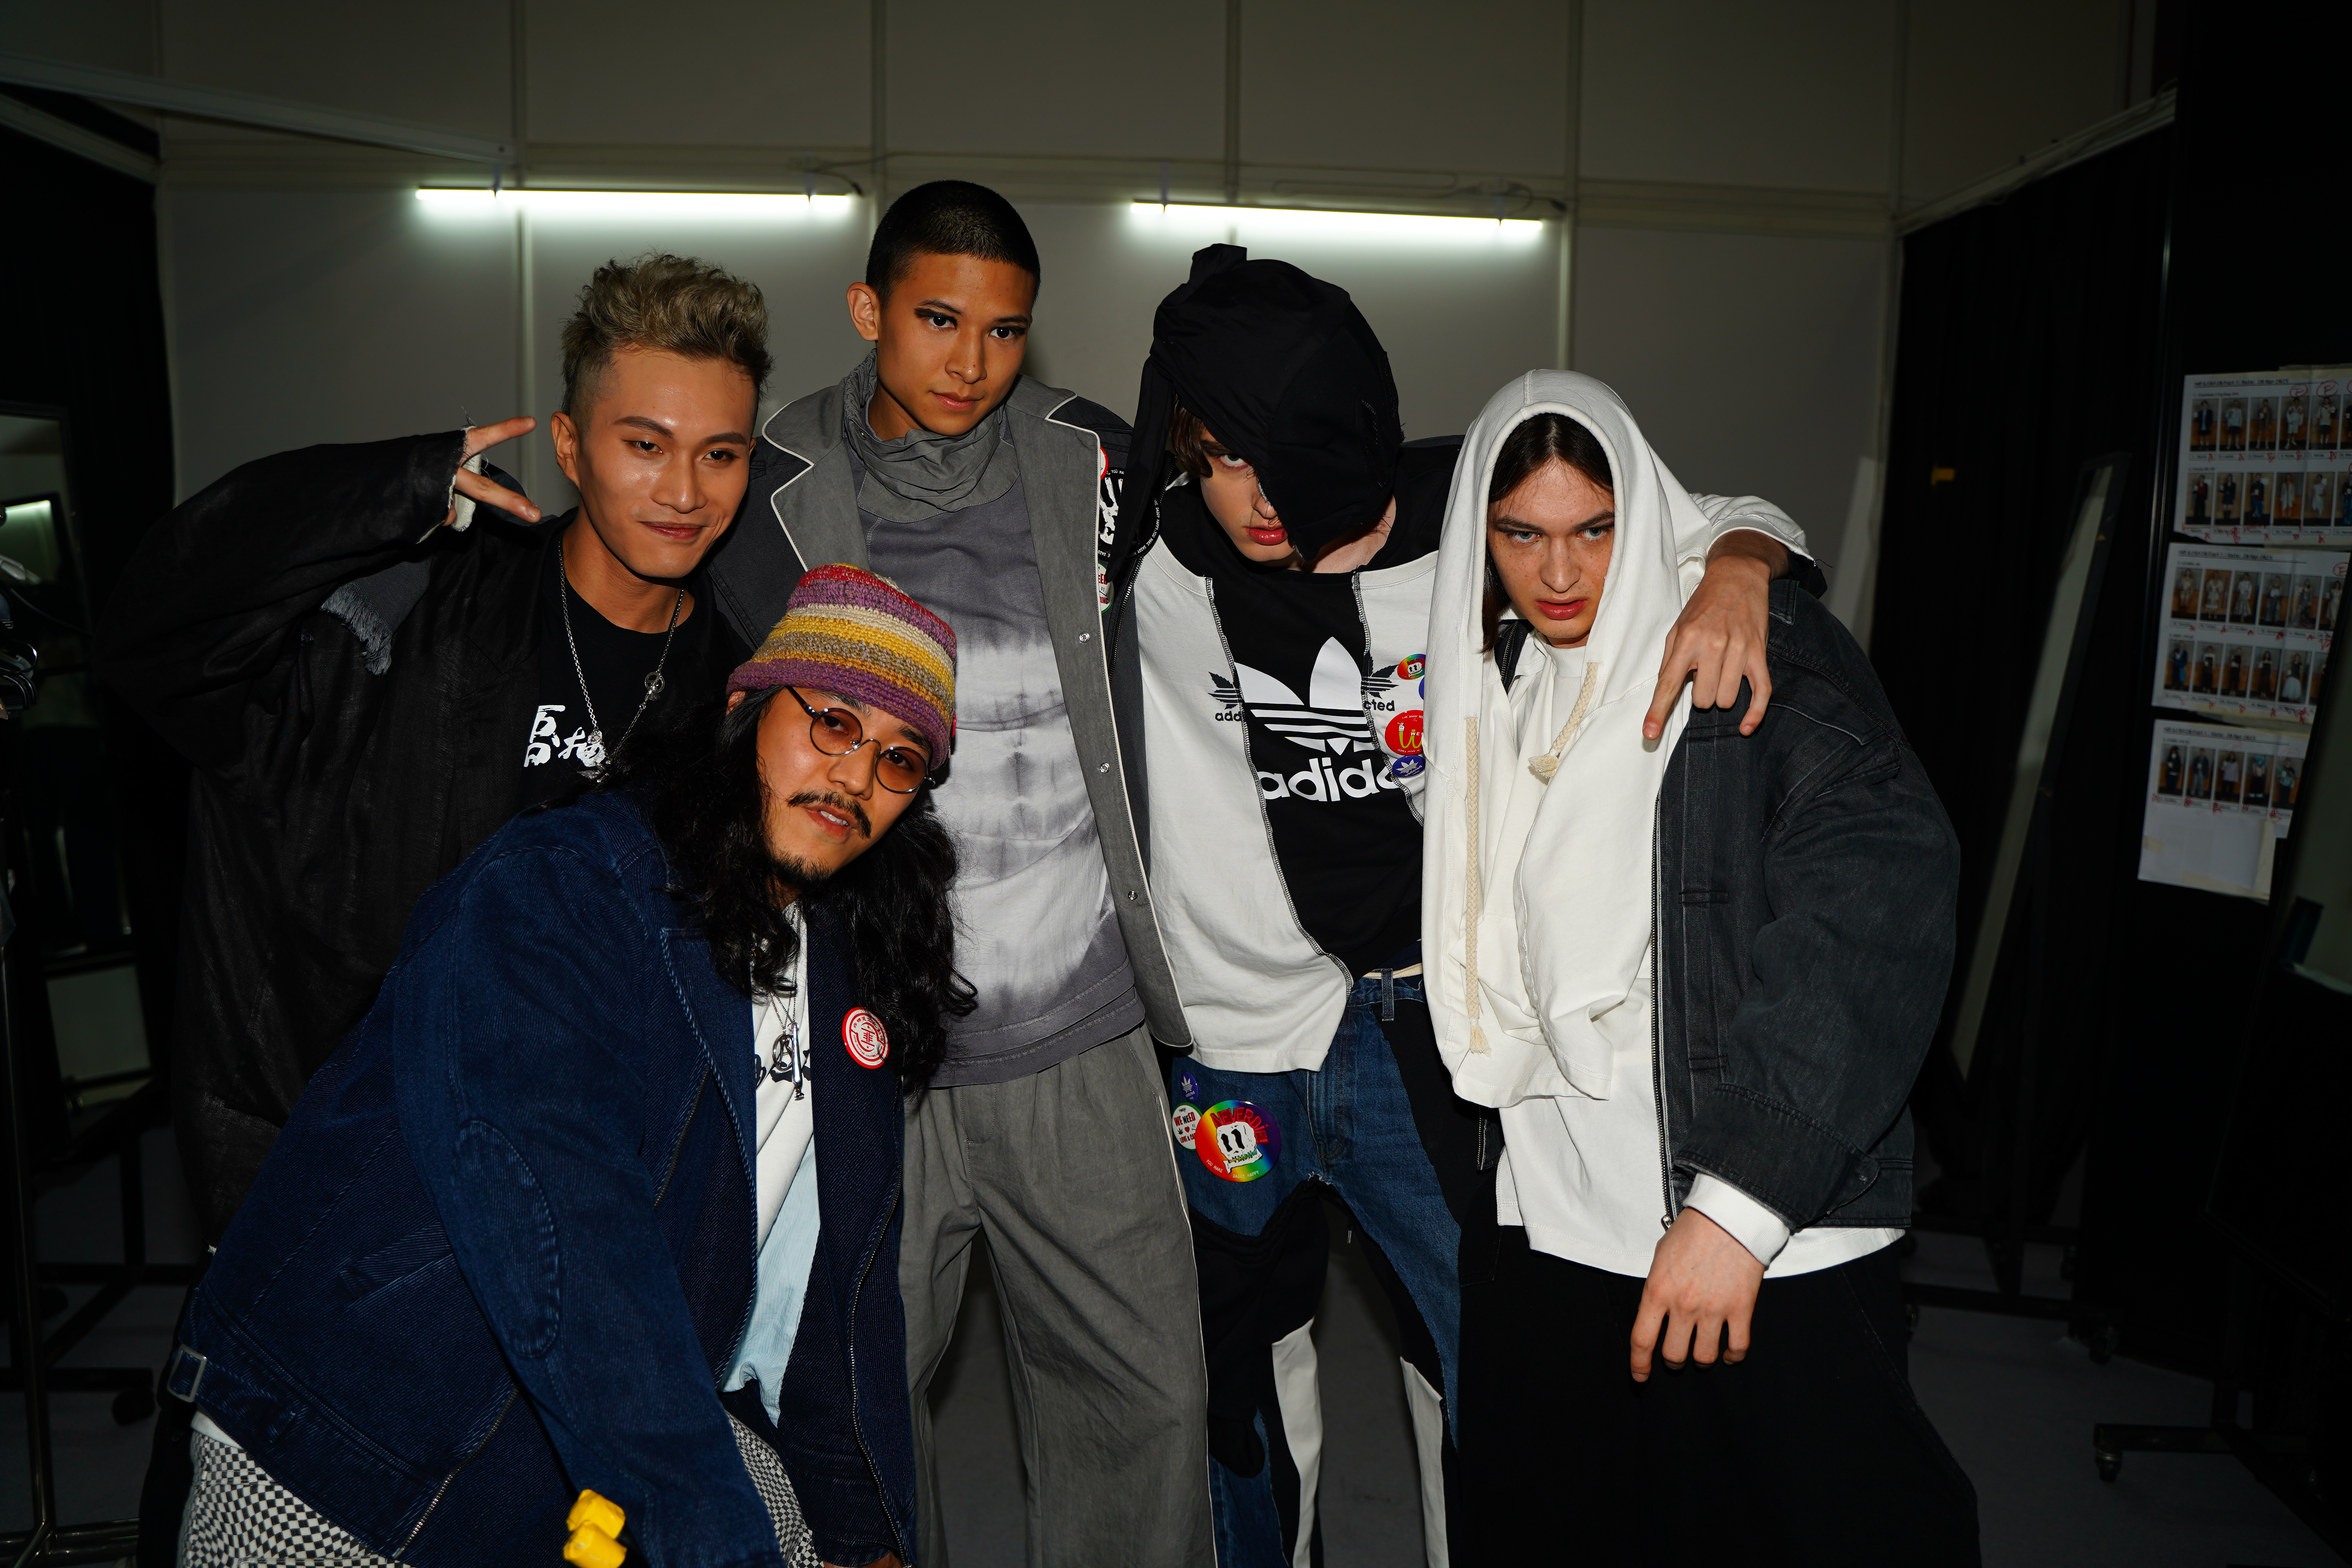 Jason (Left), fashionshow performing guest Rapper Wolfe and models at the backstage